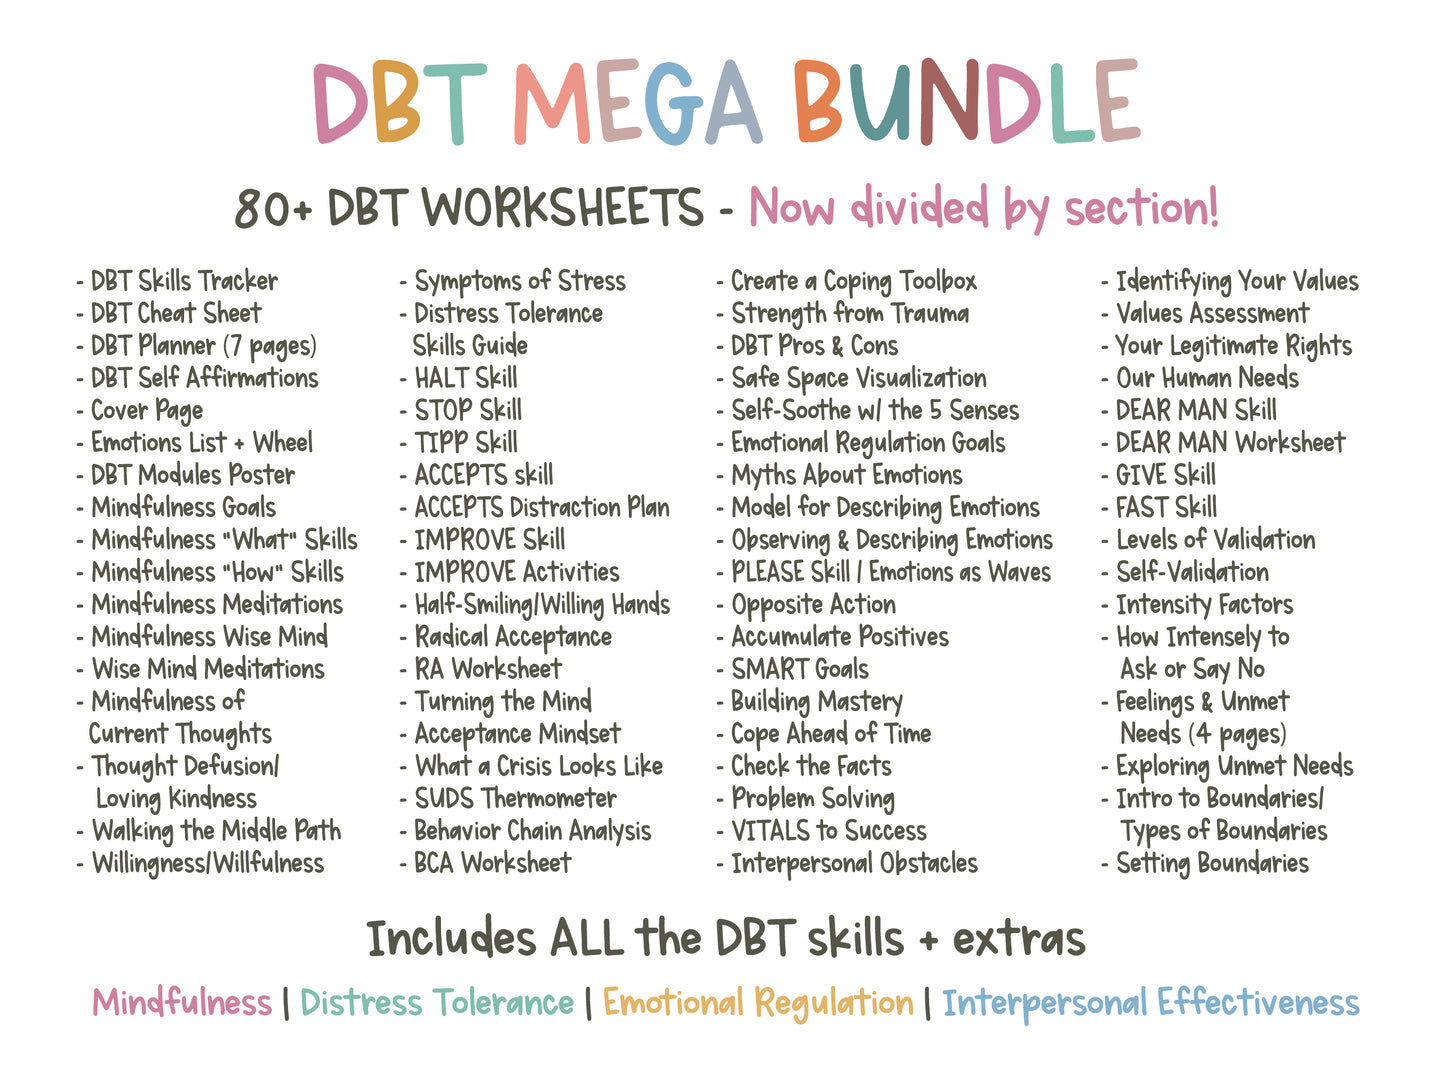 Includes ALL the DBT skills plus extras